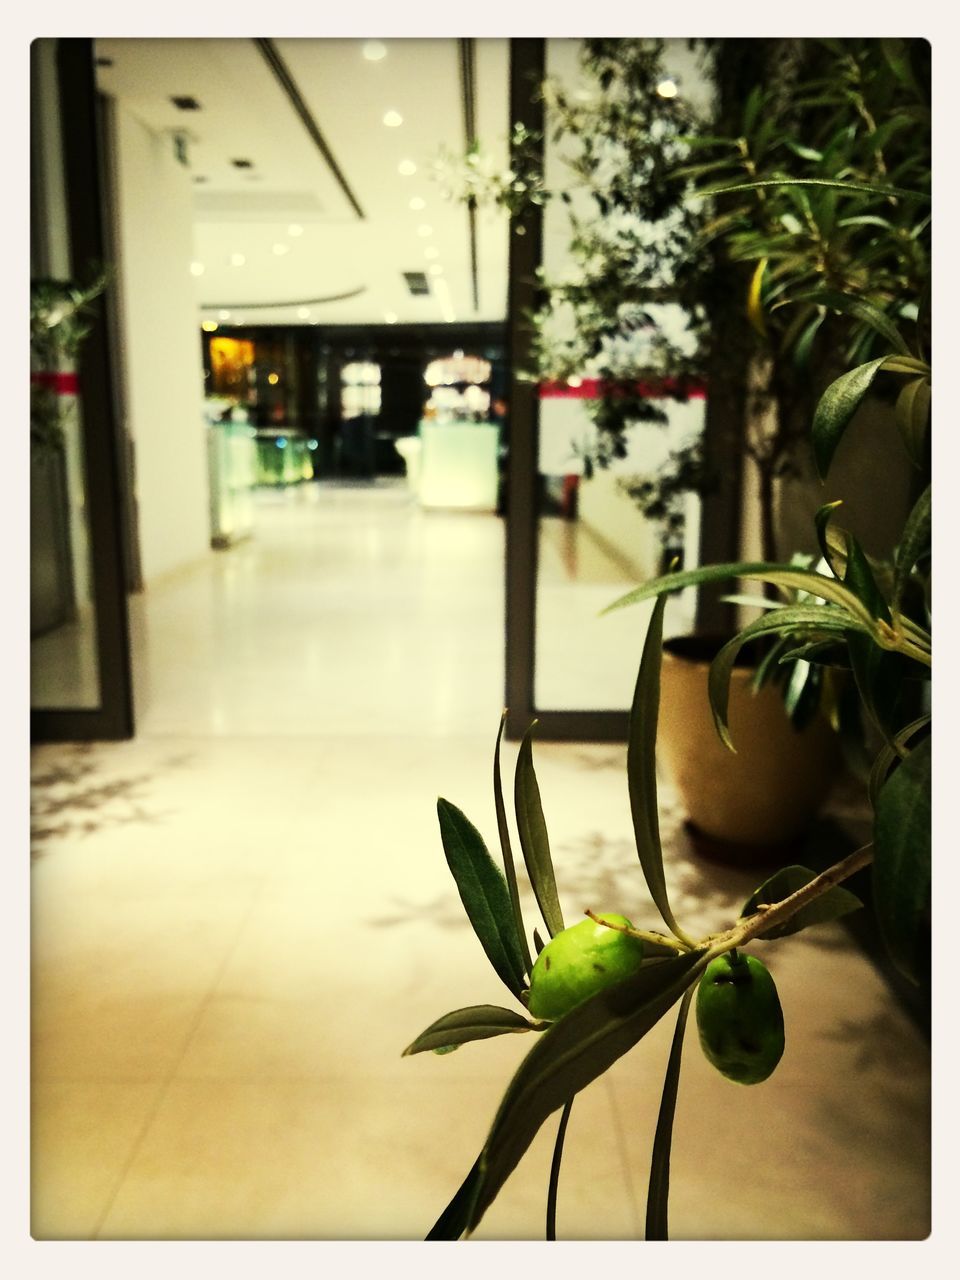 indoors, transfer print, auto post production filter, illuminated, potted plant, plant, lighting equipment, built structure, no people, glass - material, window, reflection, growth, transparent, focus on foreground, transportation, architecture, leaf, absence, hanging